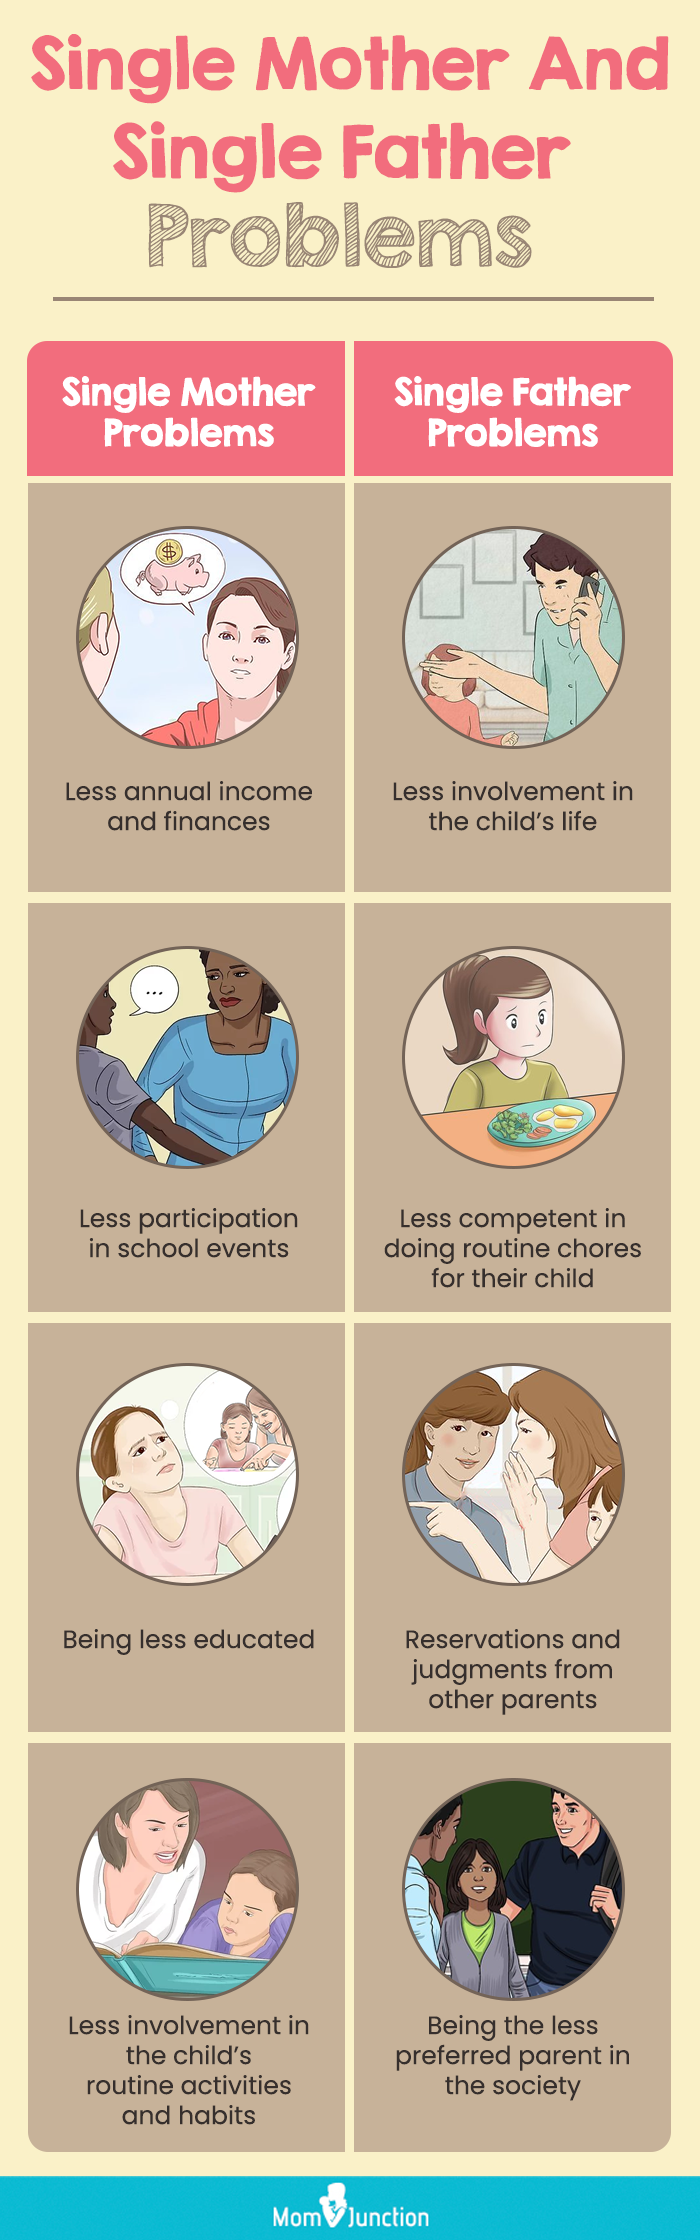 single mother single father (infographic)